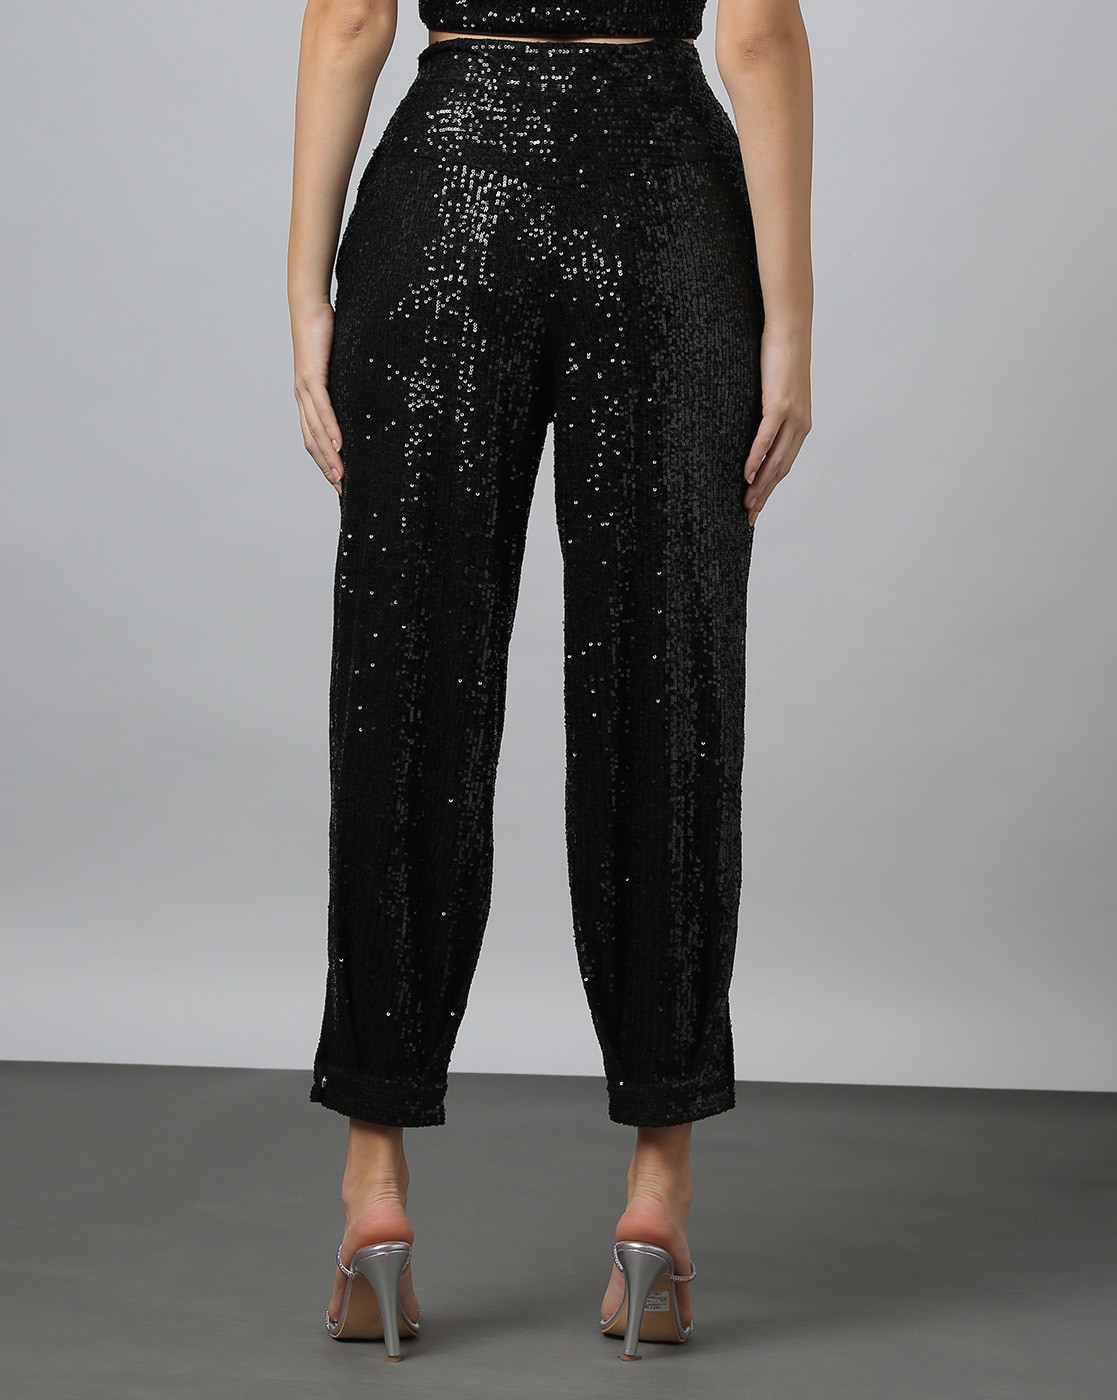 Sequin casual wide pants women's high waist loose straight flare